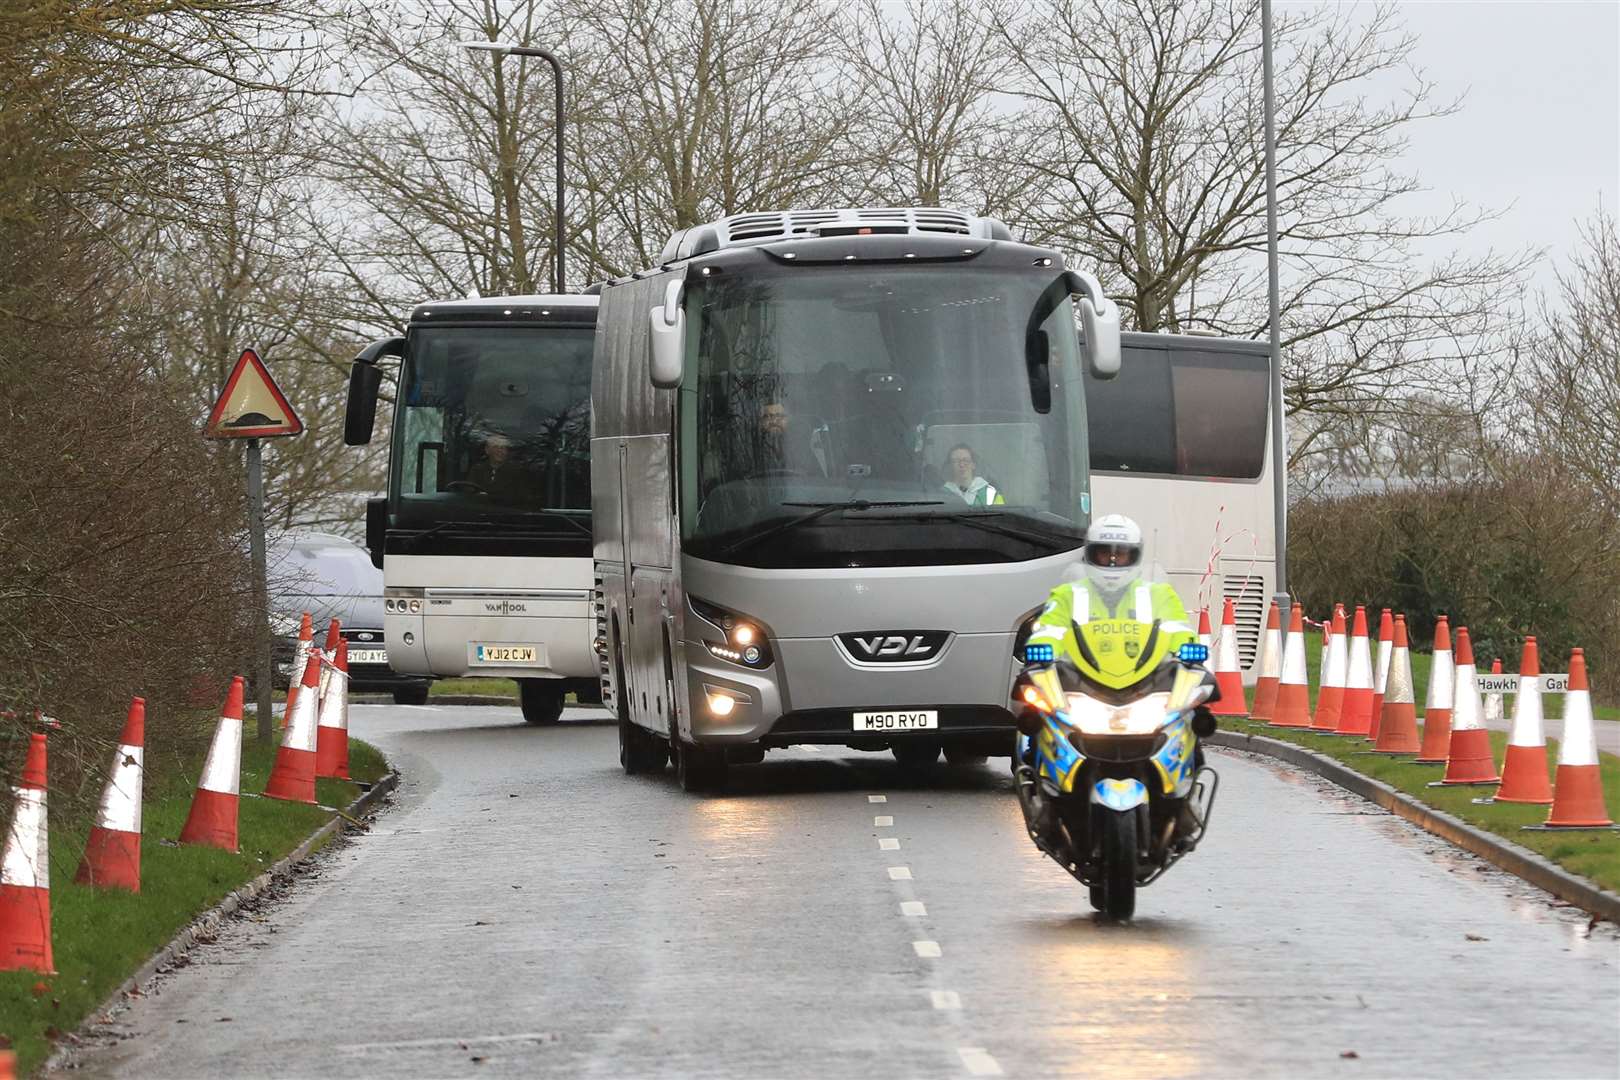 Coaches carrying coronavirus evacuees repatriated to the UK from Wuhan arrive at Kents Hill Park Training and Conference Centre in Milton Keynes (Aaron Chown/PA)